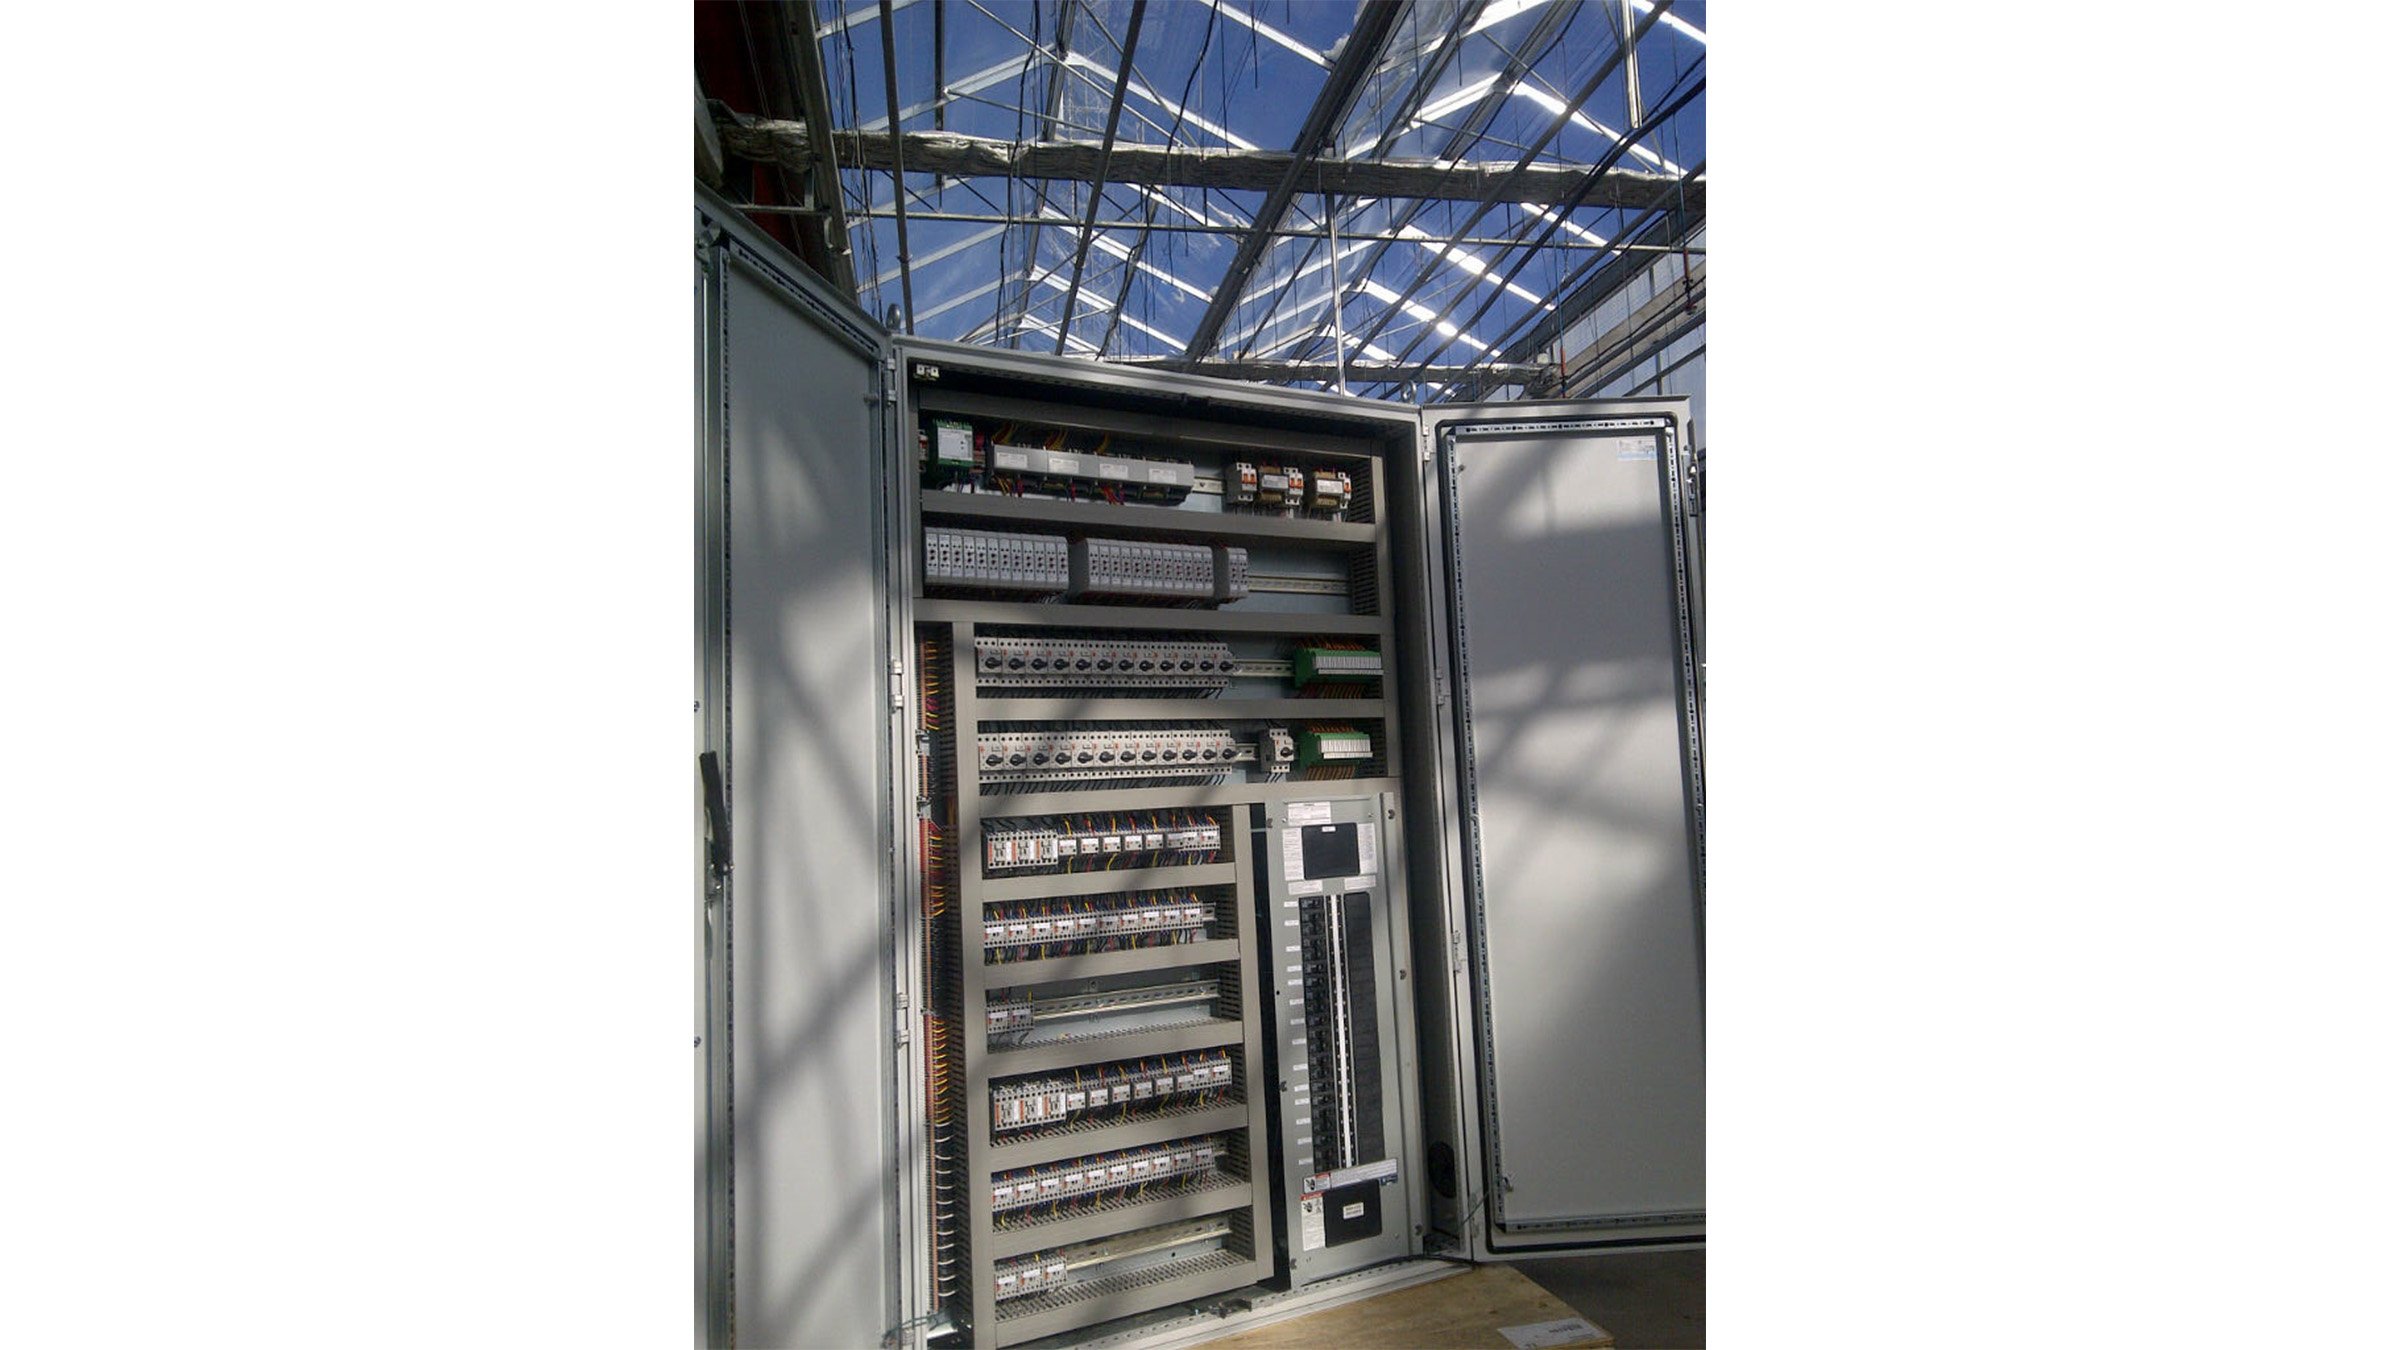 Green house motor control panel for ISPECS greenhouse project to open and close green house roof windows